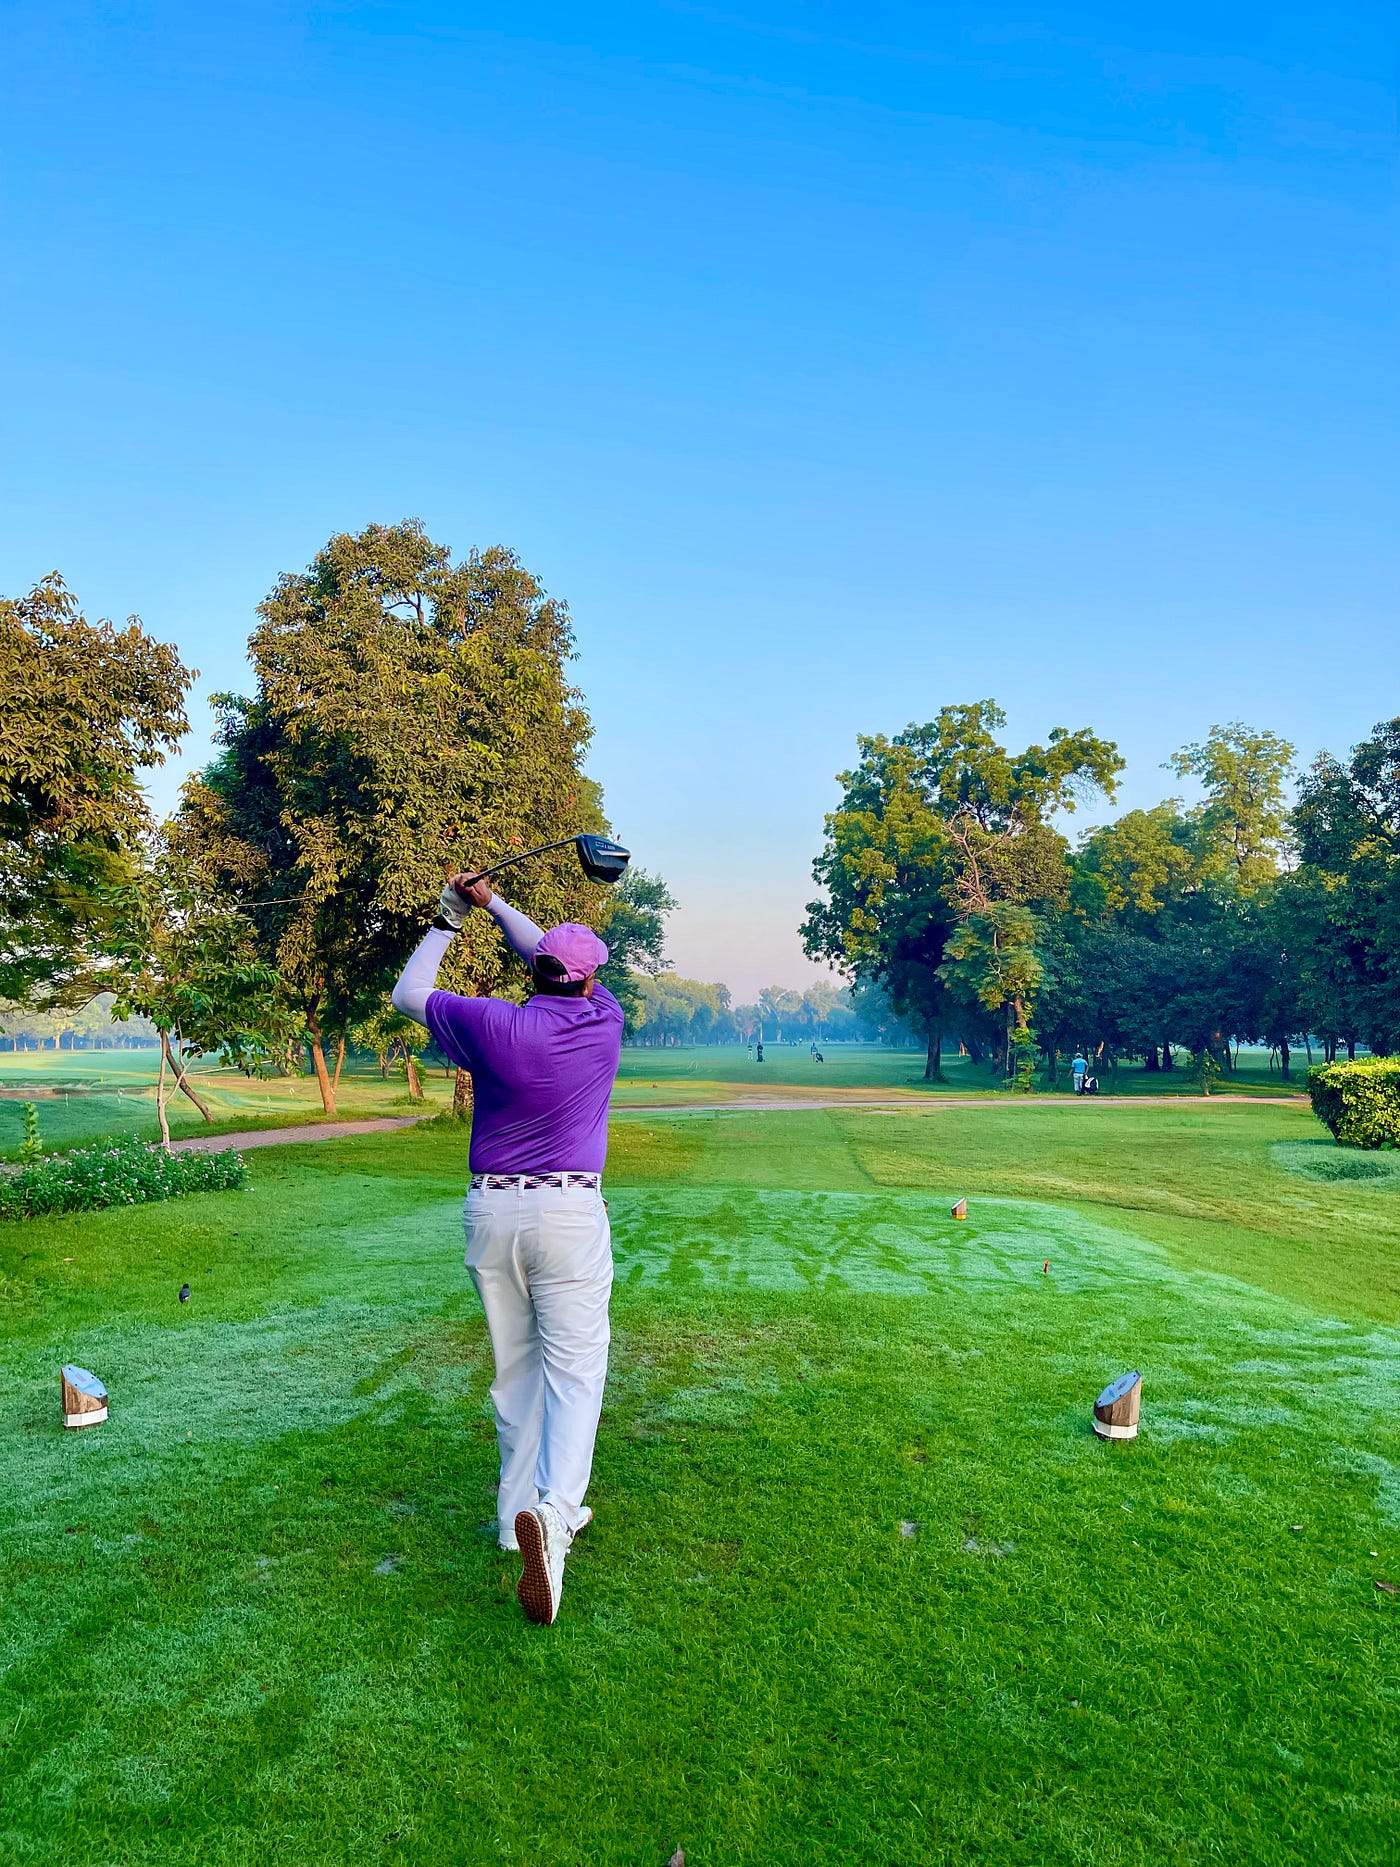 Tree Swing to Golf Swings. “A golf swing is a collection of… | by Ahsan  Jamil | Medium